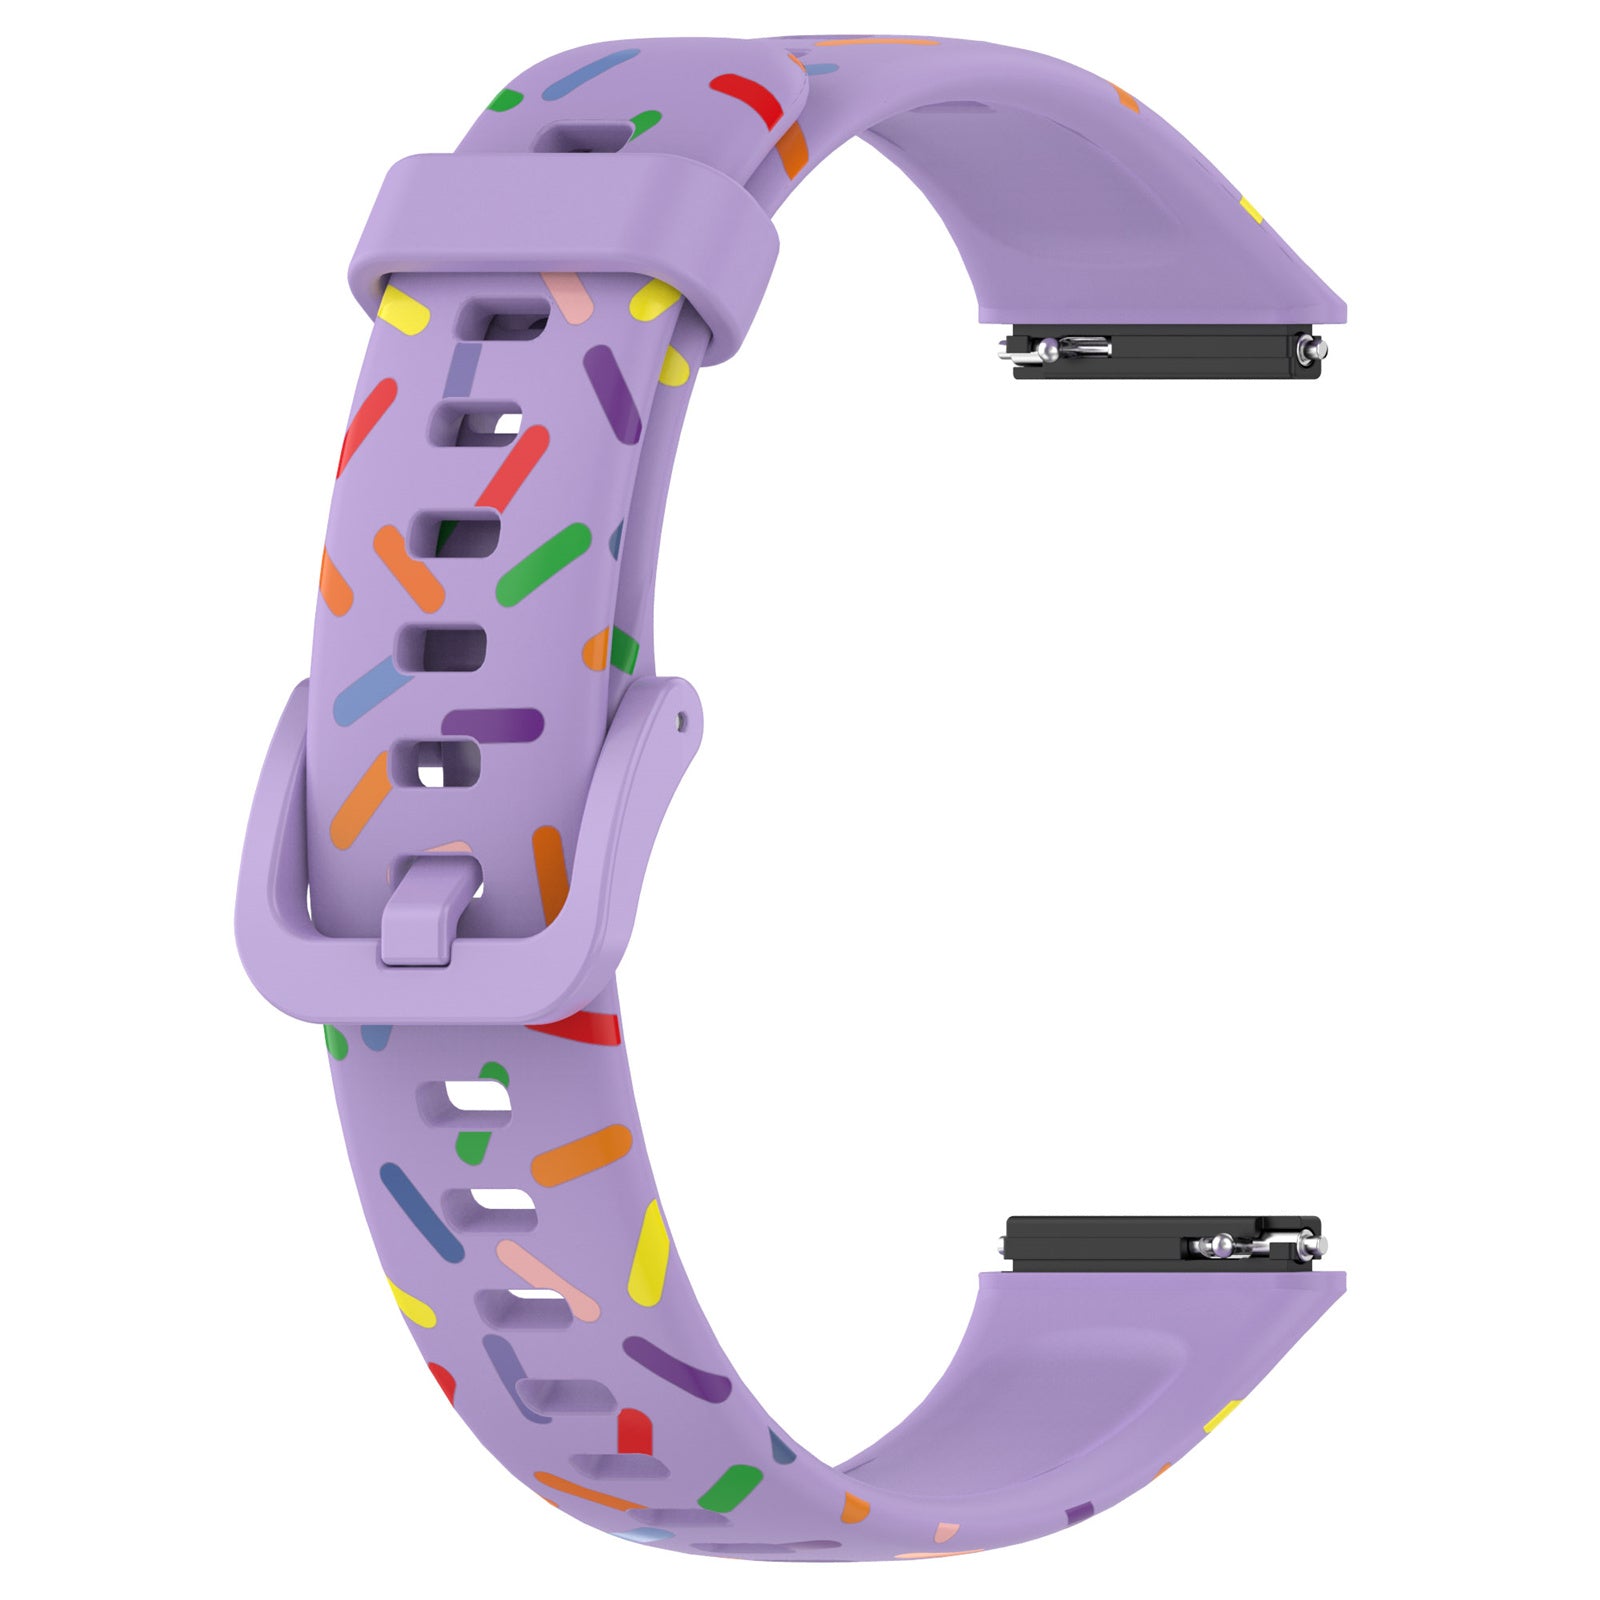 Uniqkart for Huawei Band 7 Colorful Spotted Wrist Band Replacement Silicone Watch Strap - Purple